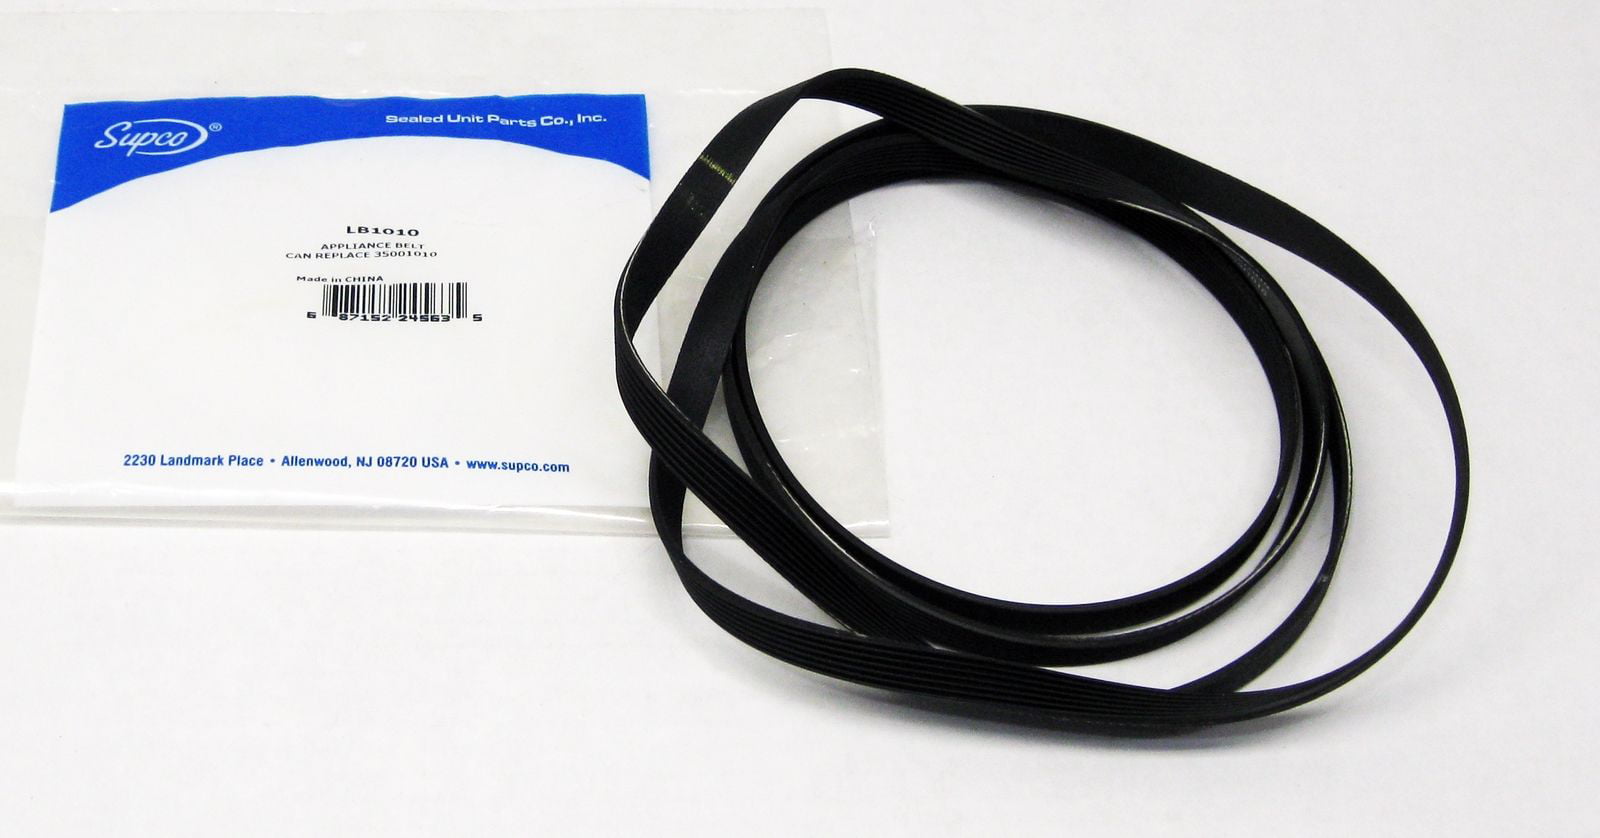 SUPCO LB1010 Dryer Belt for Whirlpool Maytag 35001010 for sale online